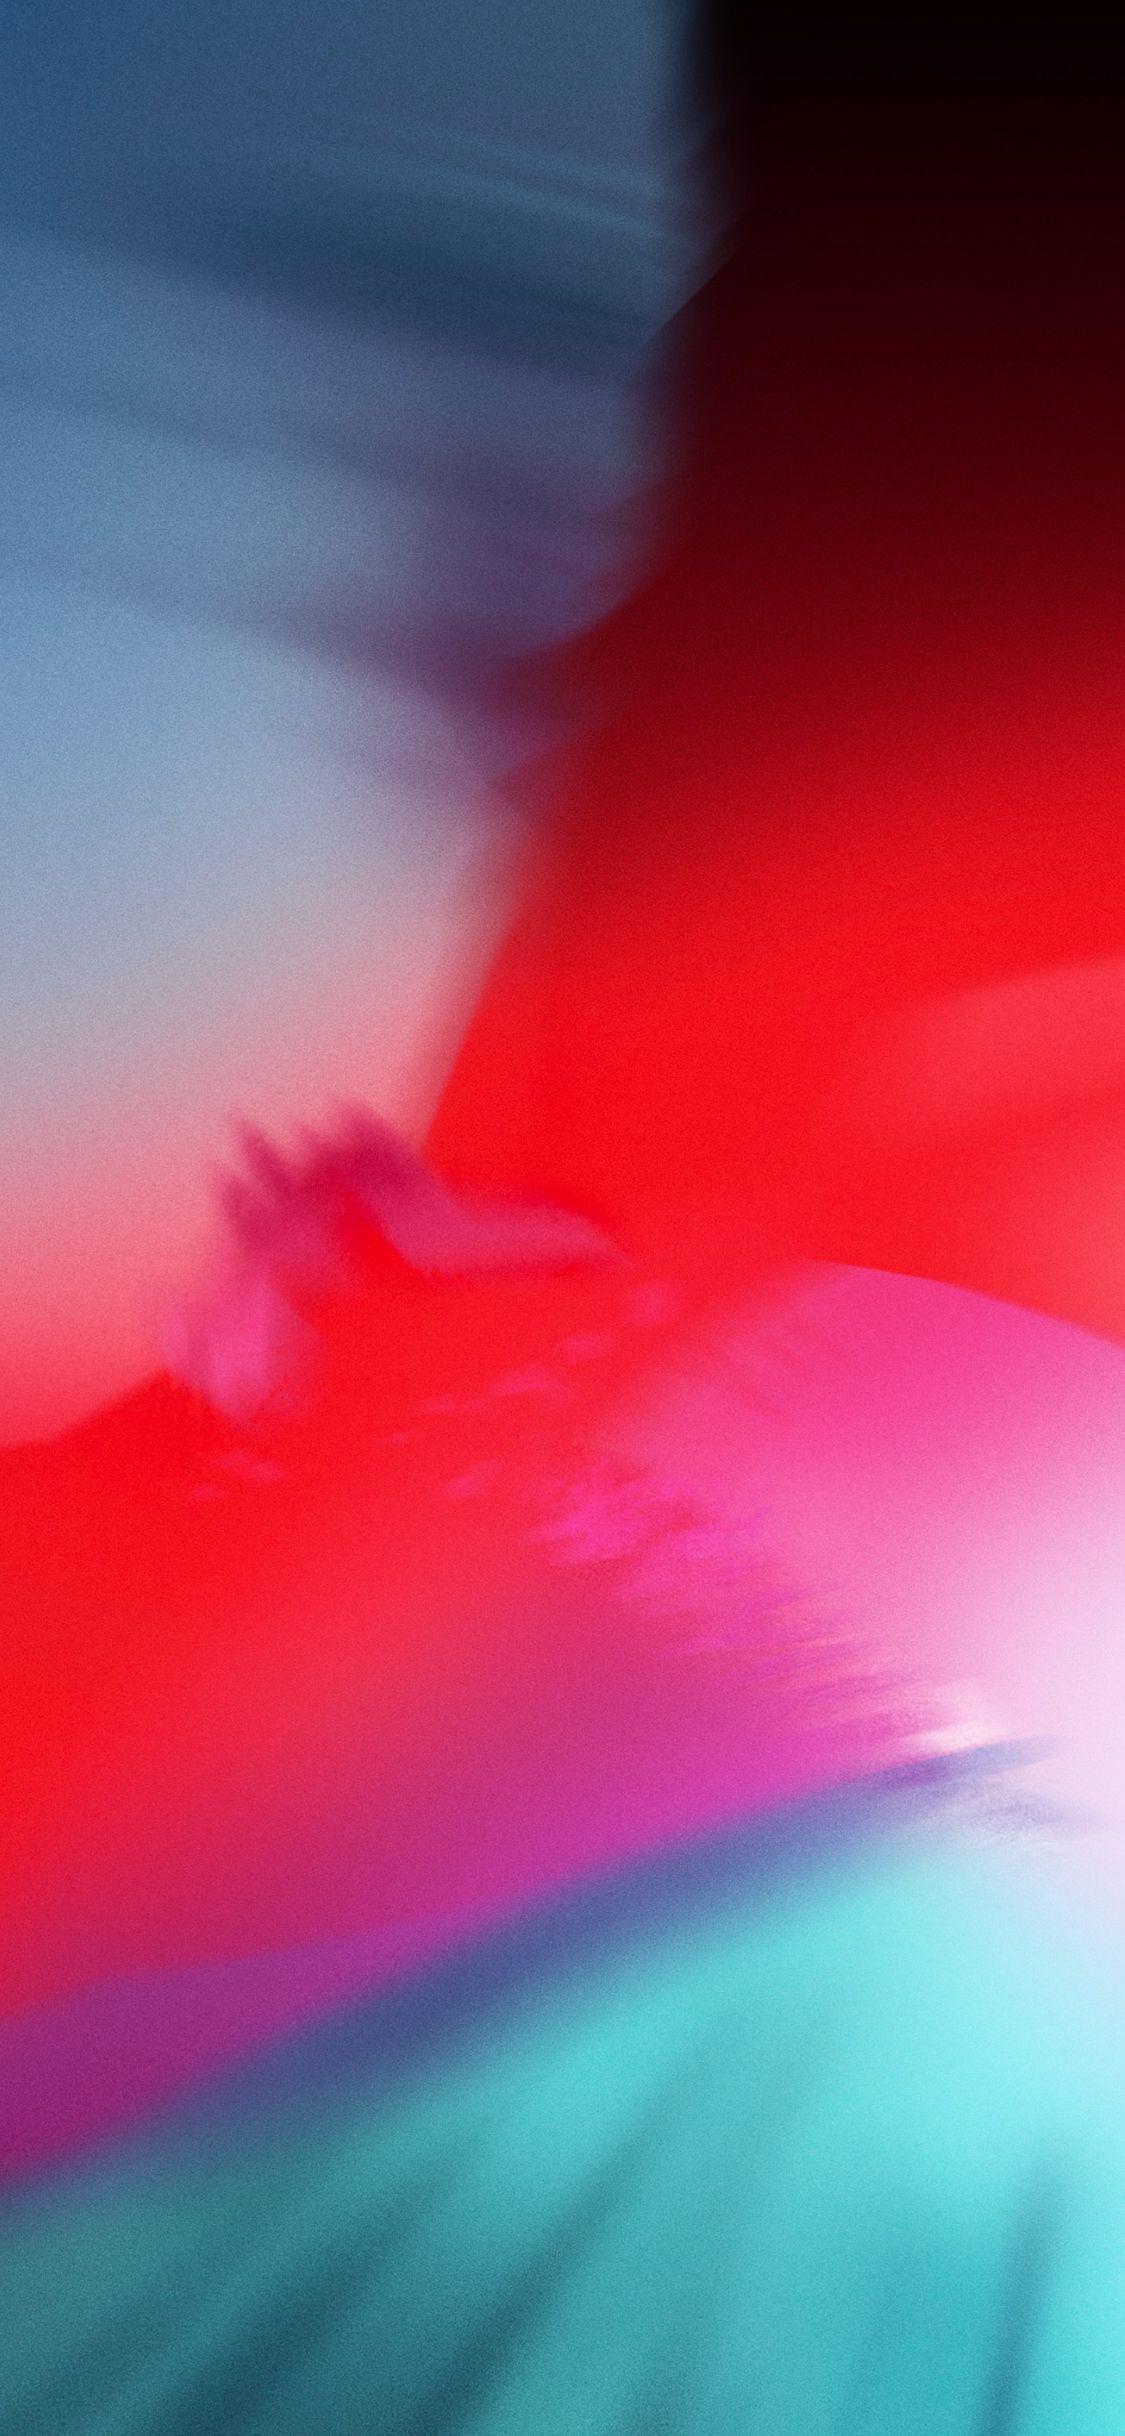 Background. iPhone wallpaper ios